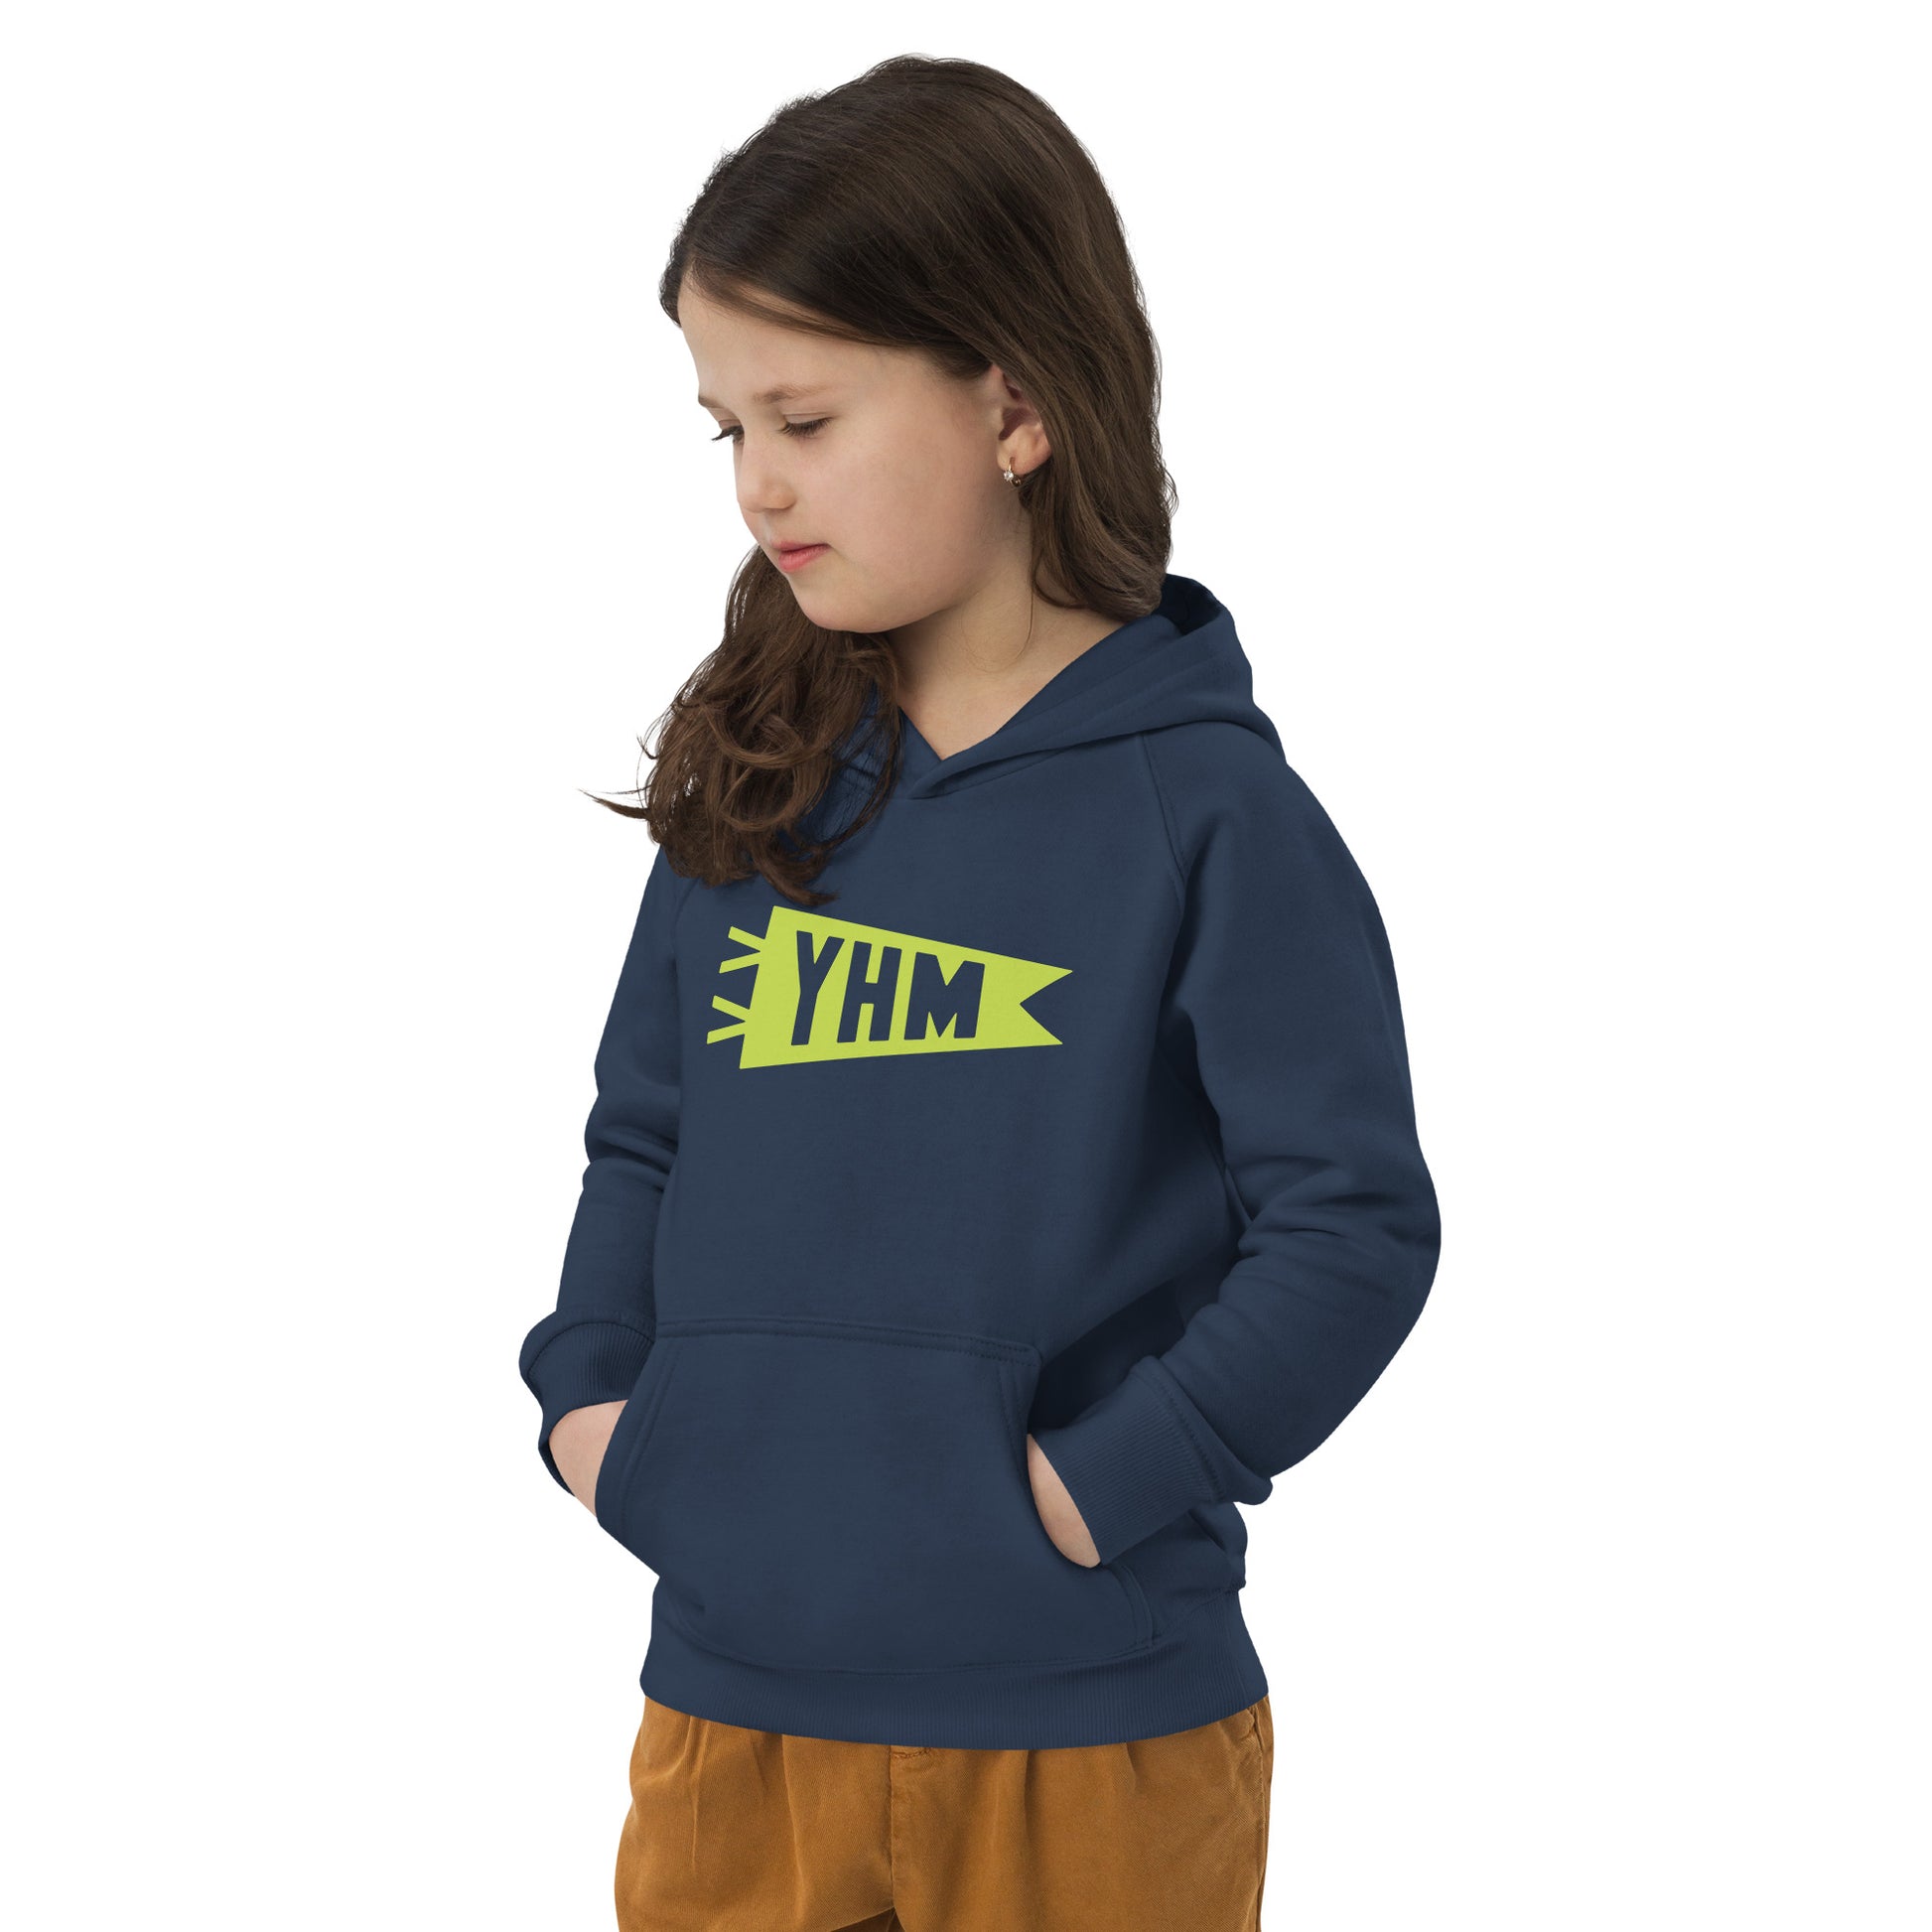 Kid's Sustainable Hoodie - Green Graphic • YHM Hamilton • YHM Designs - Image 05